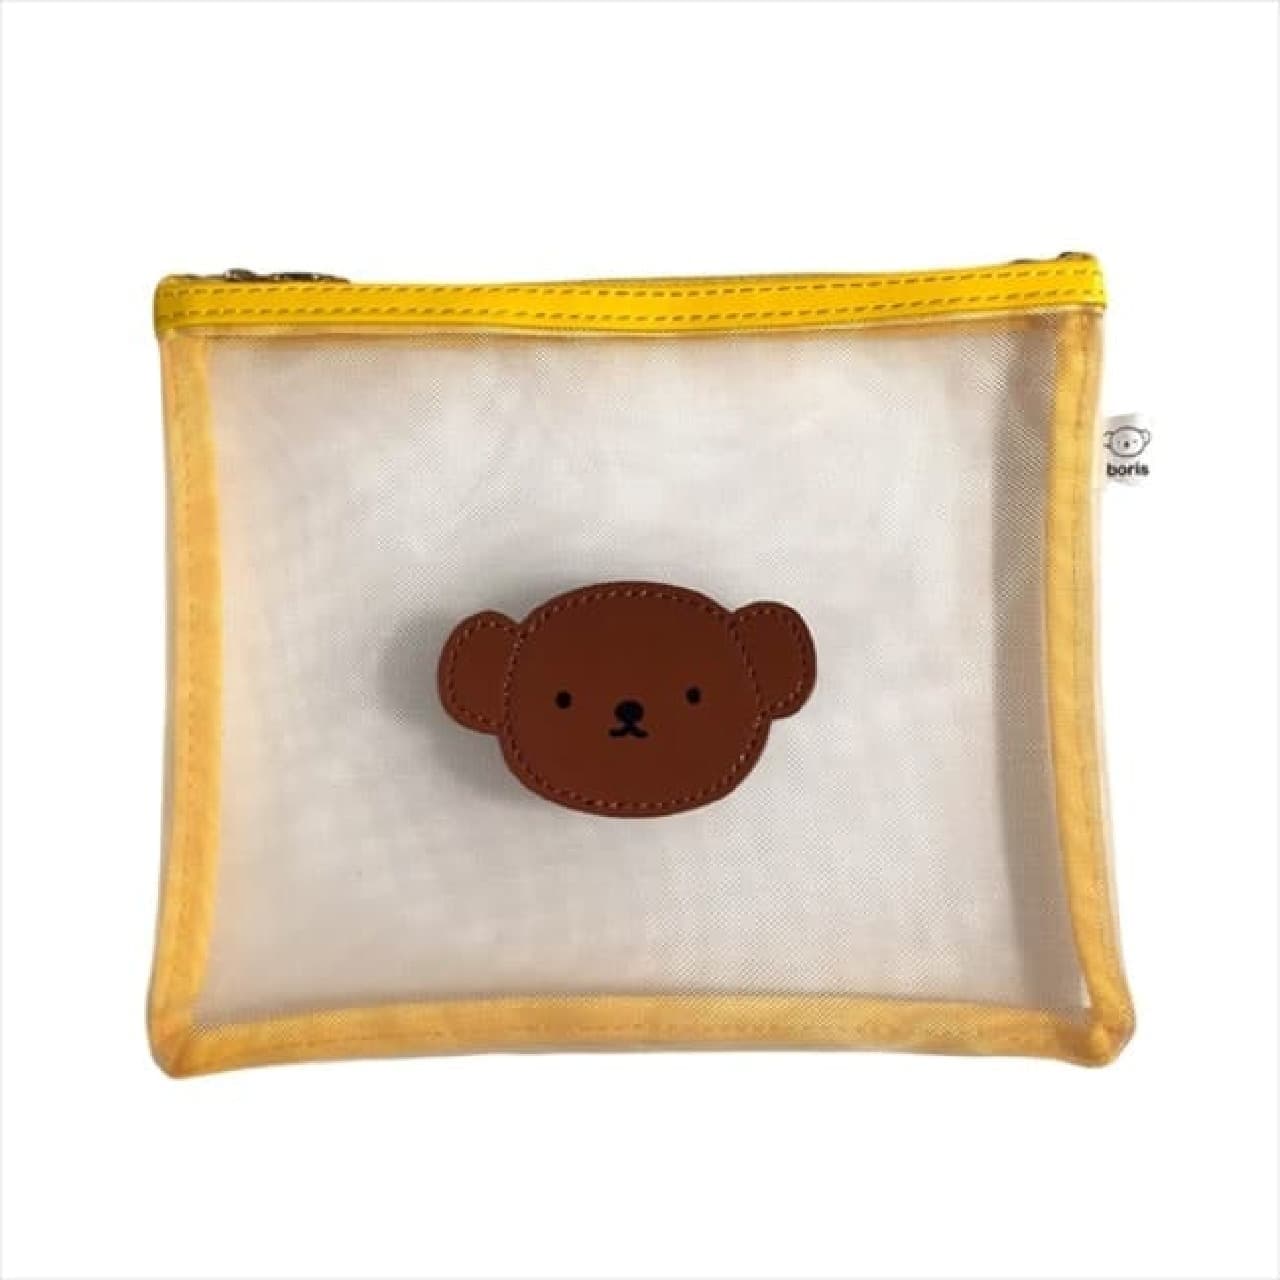 Miffy pattern mesh pouch in Villevan --Cute appliqué! A total pattern clear pouch is also available